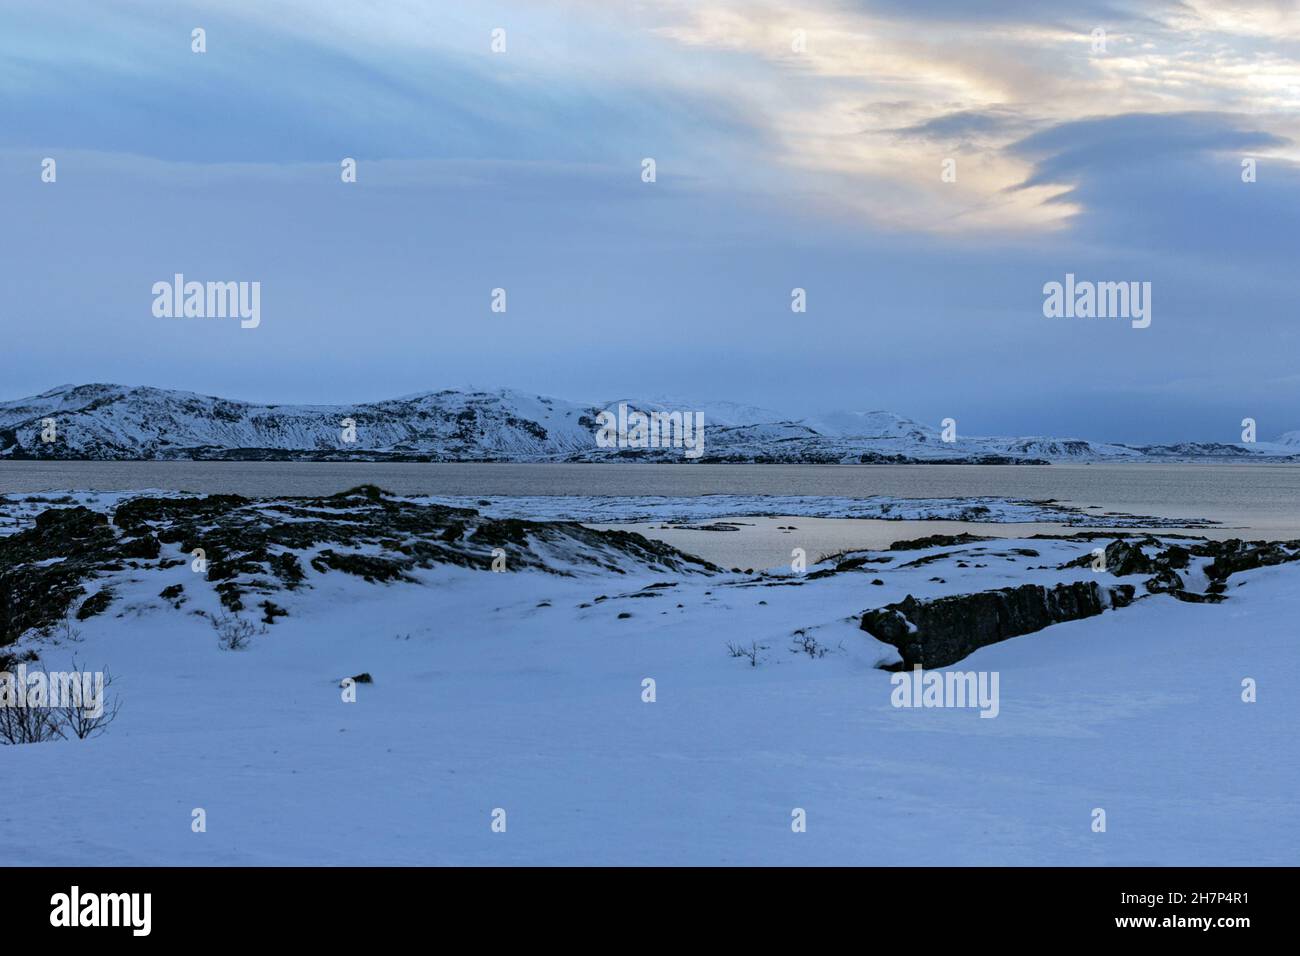 Real charming snow-covered landscapes of Iceland at cloudy dusk winter time Stock Photo